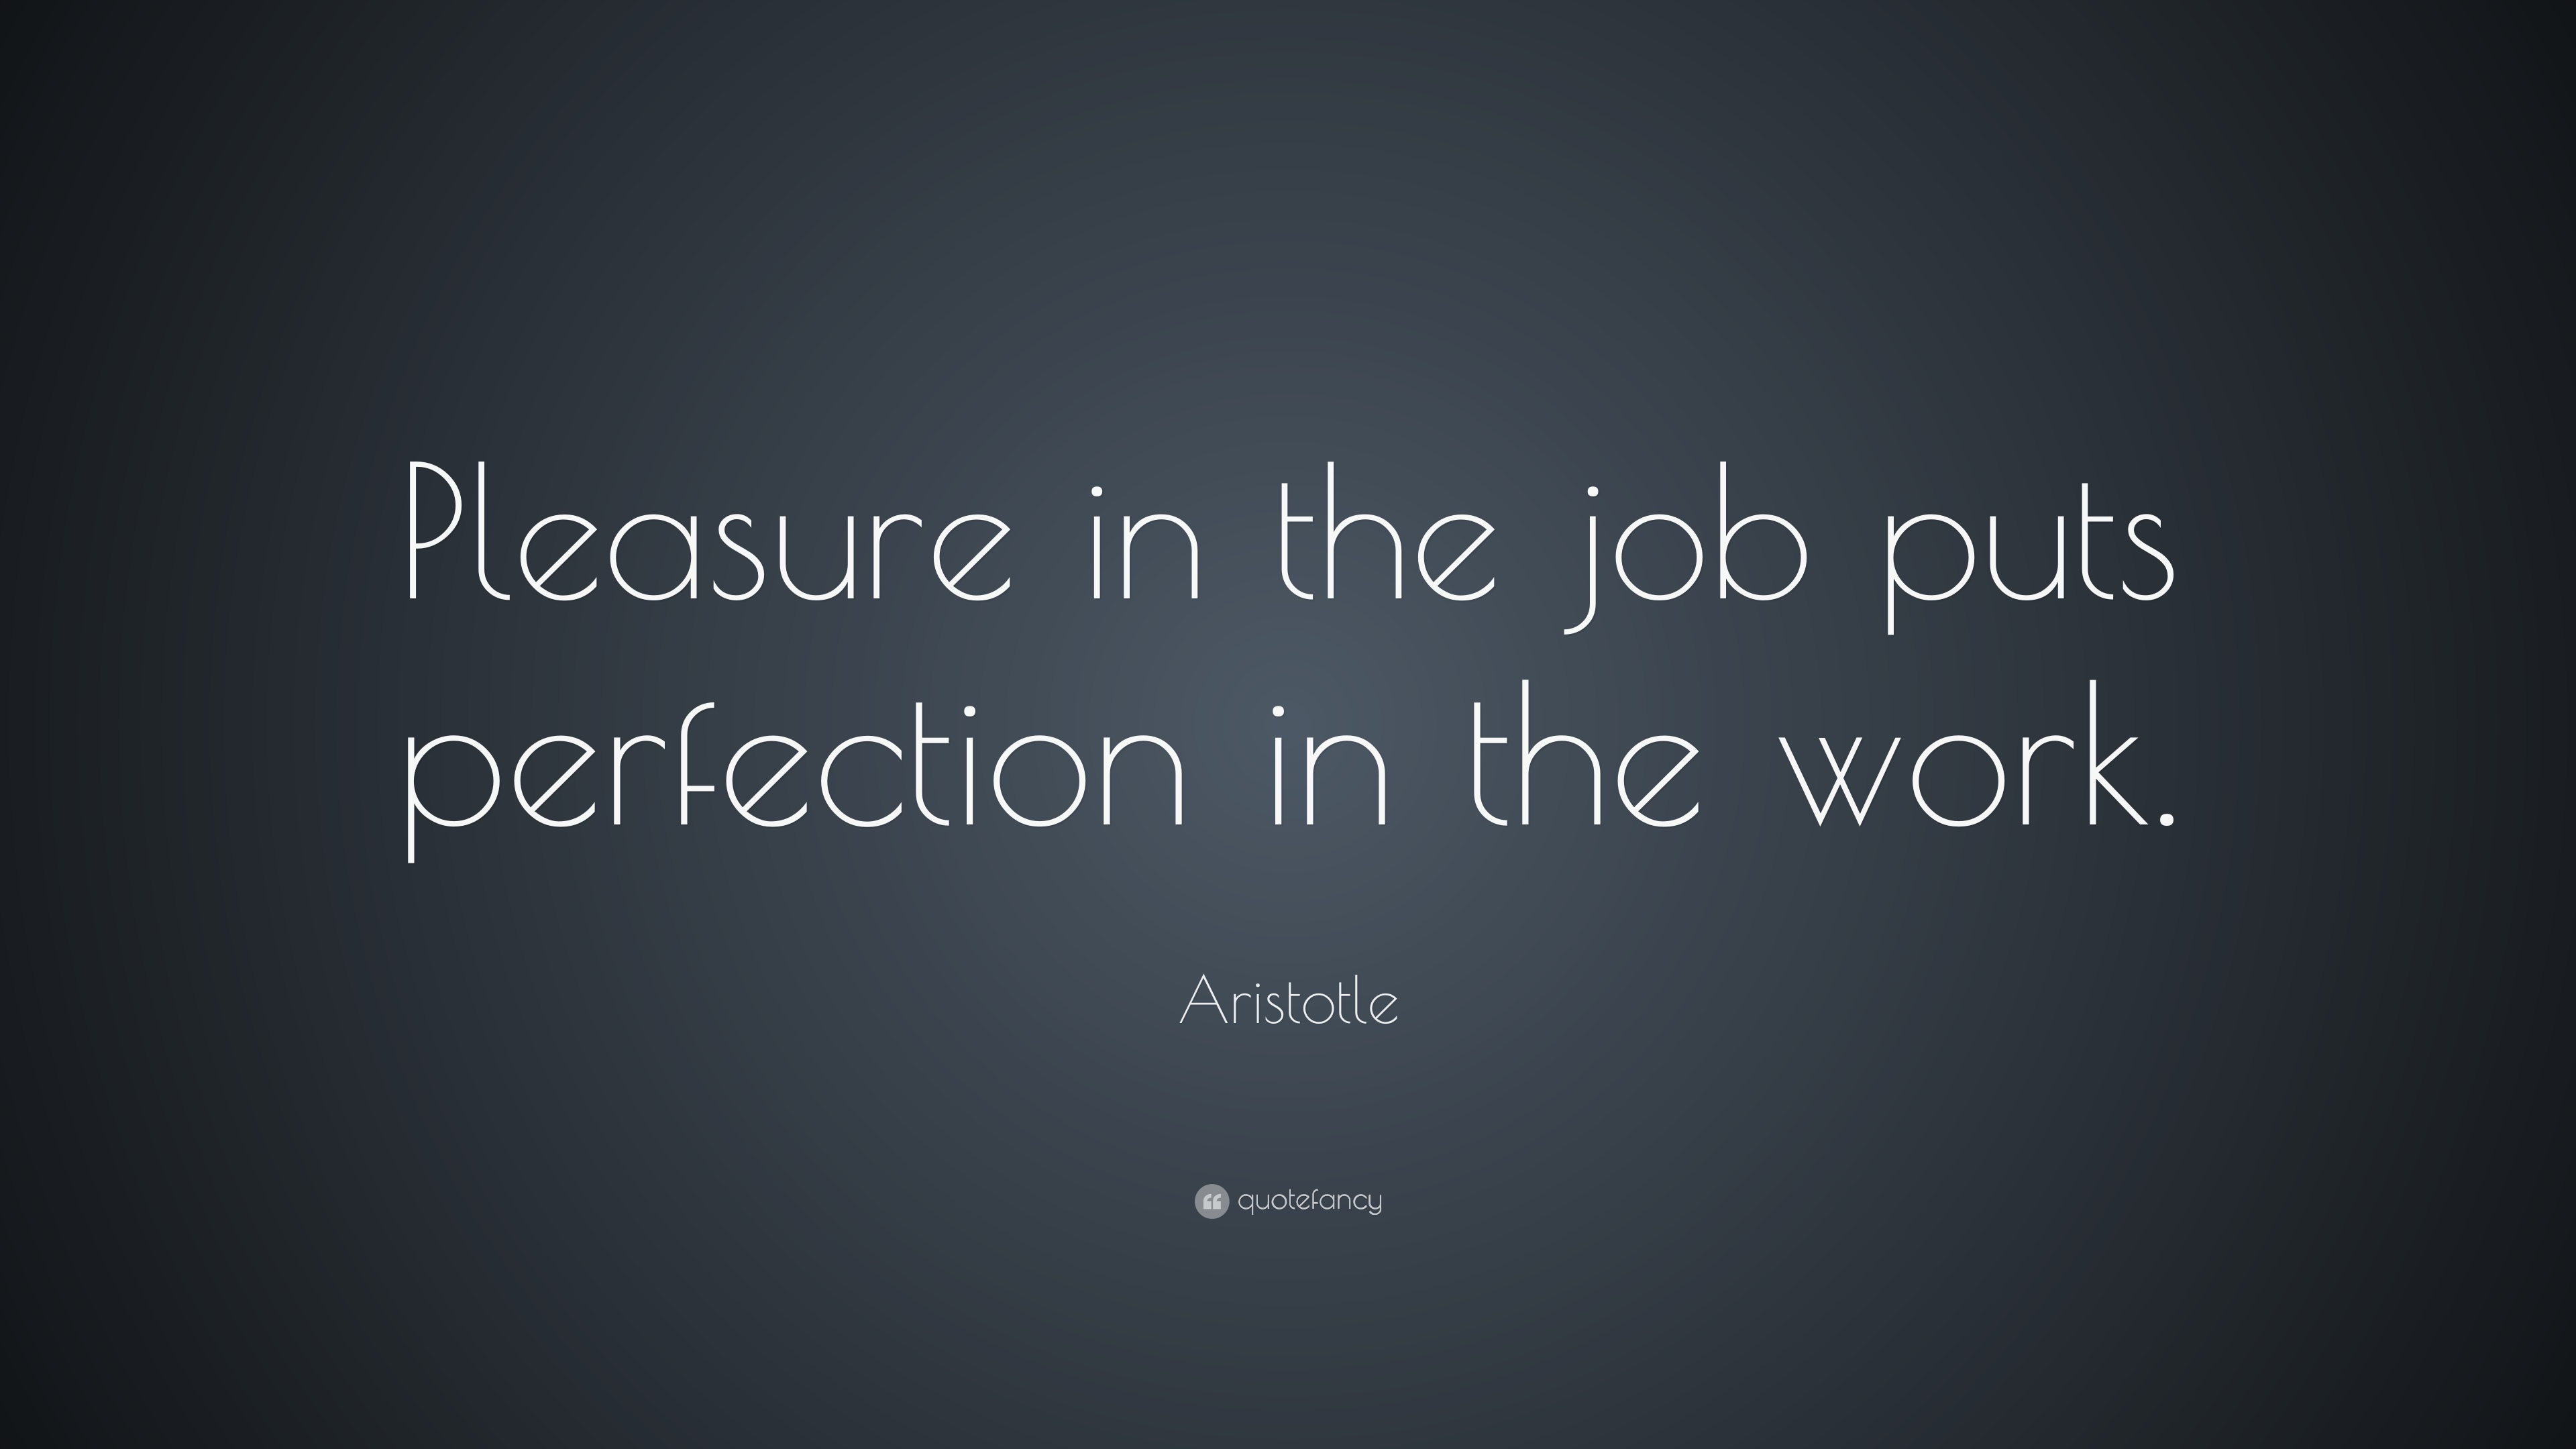 Pleasure in the job puts perfection in the work. – Aristotle